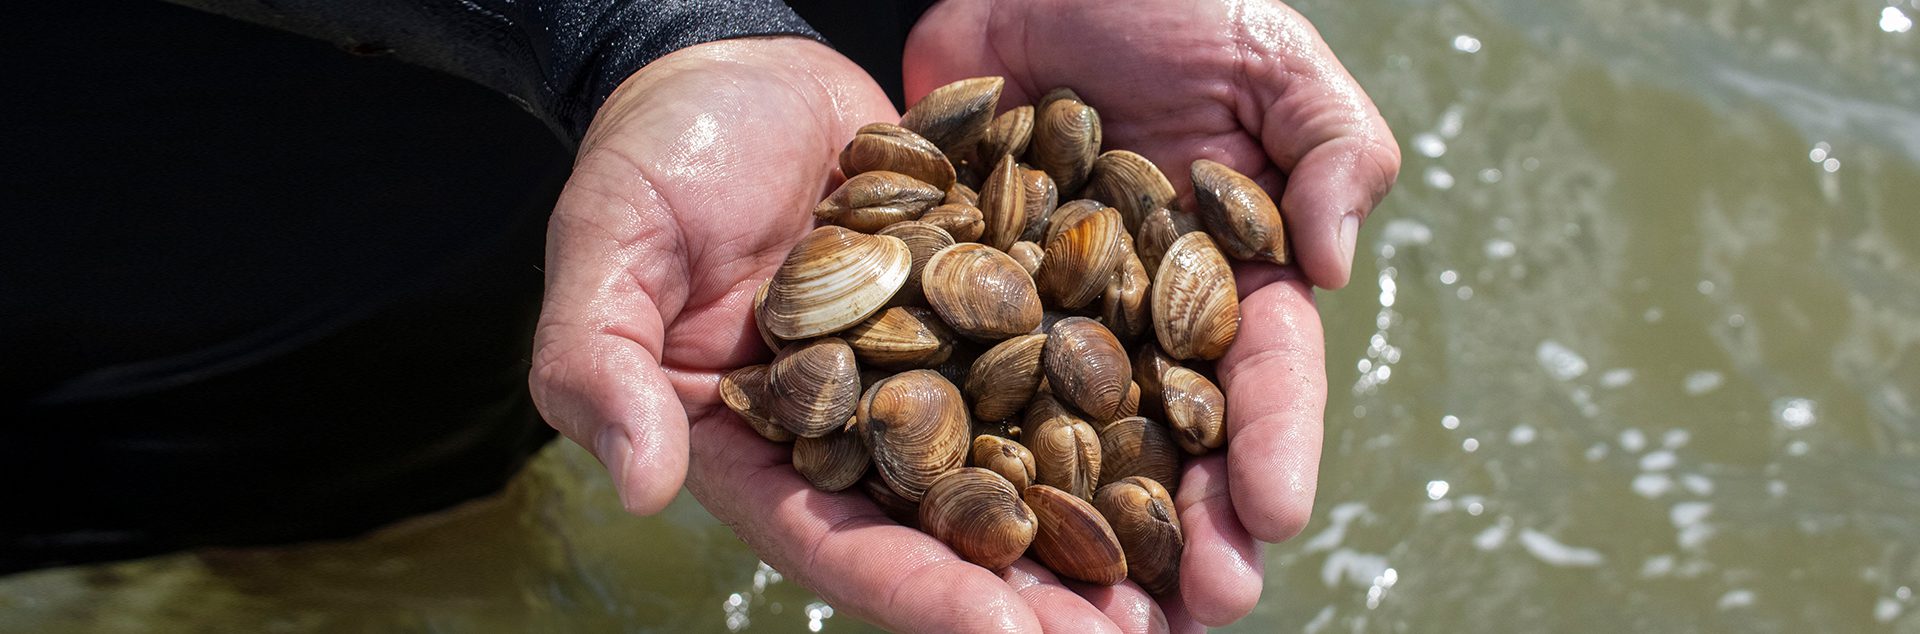 hands full of clams